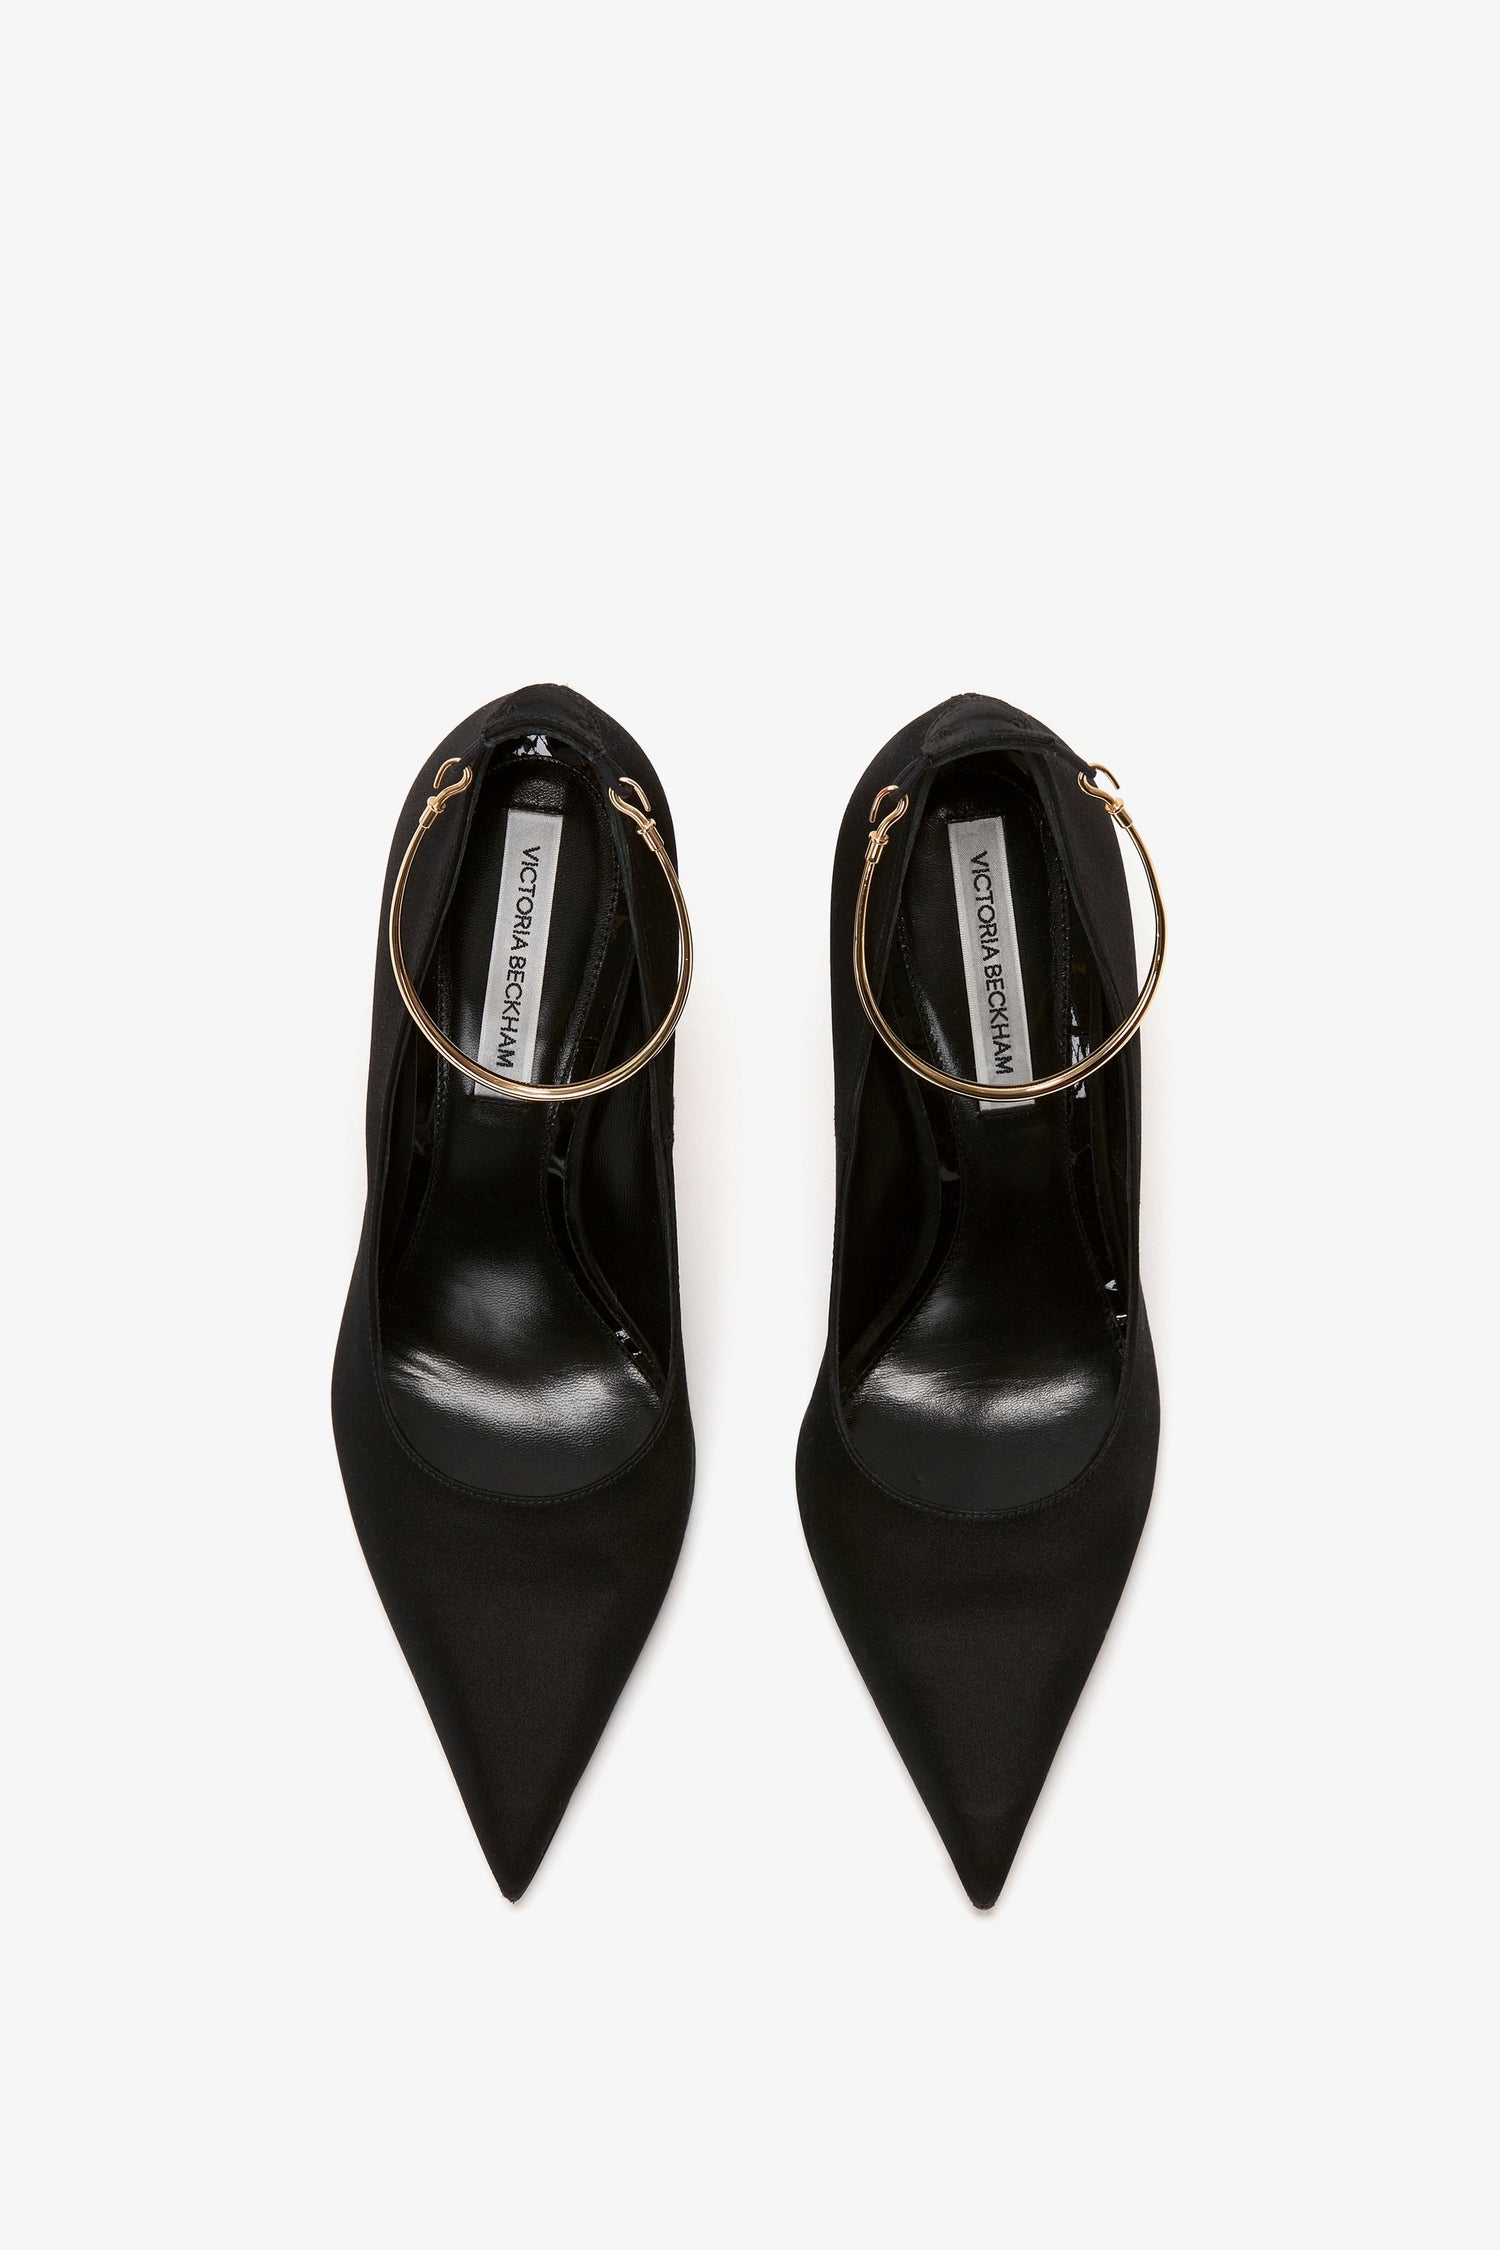 A pair of Victoria Beckham Pointy Toe Pump in Black Satin with gold hoop ankle straps, featuring a sleek 100mm heel, viewed from above.